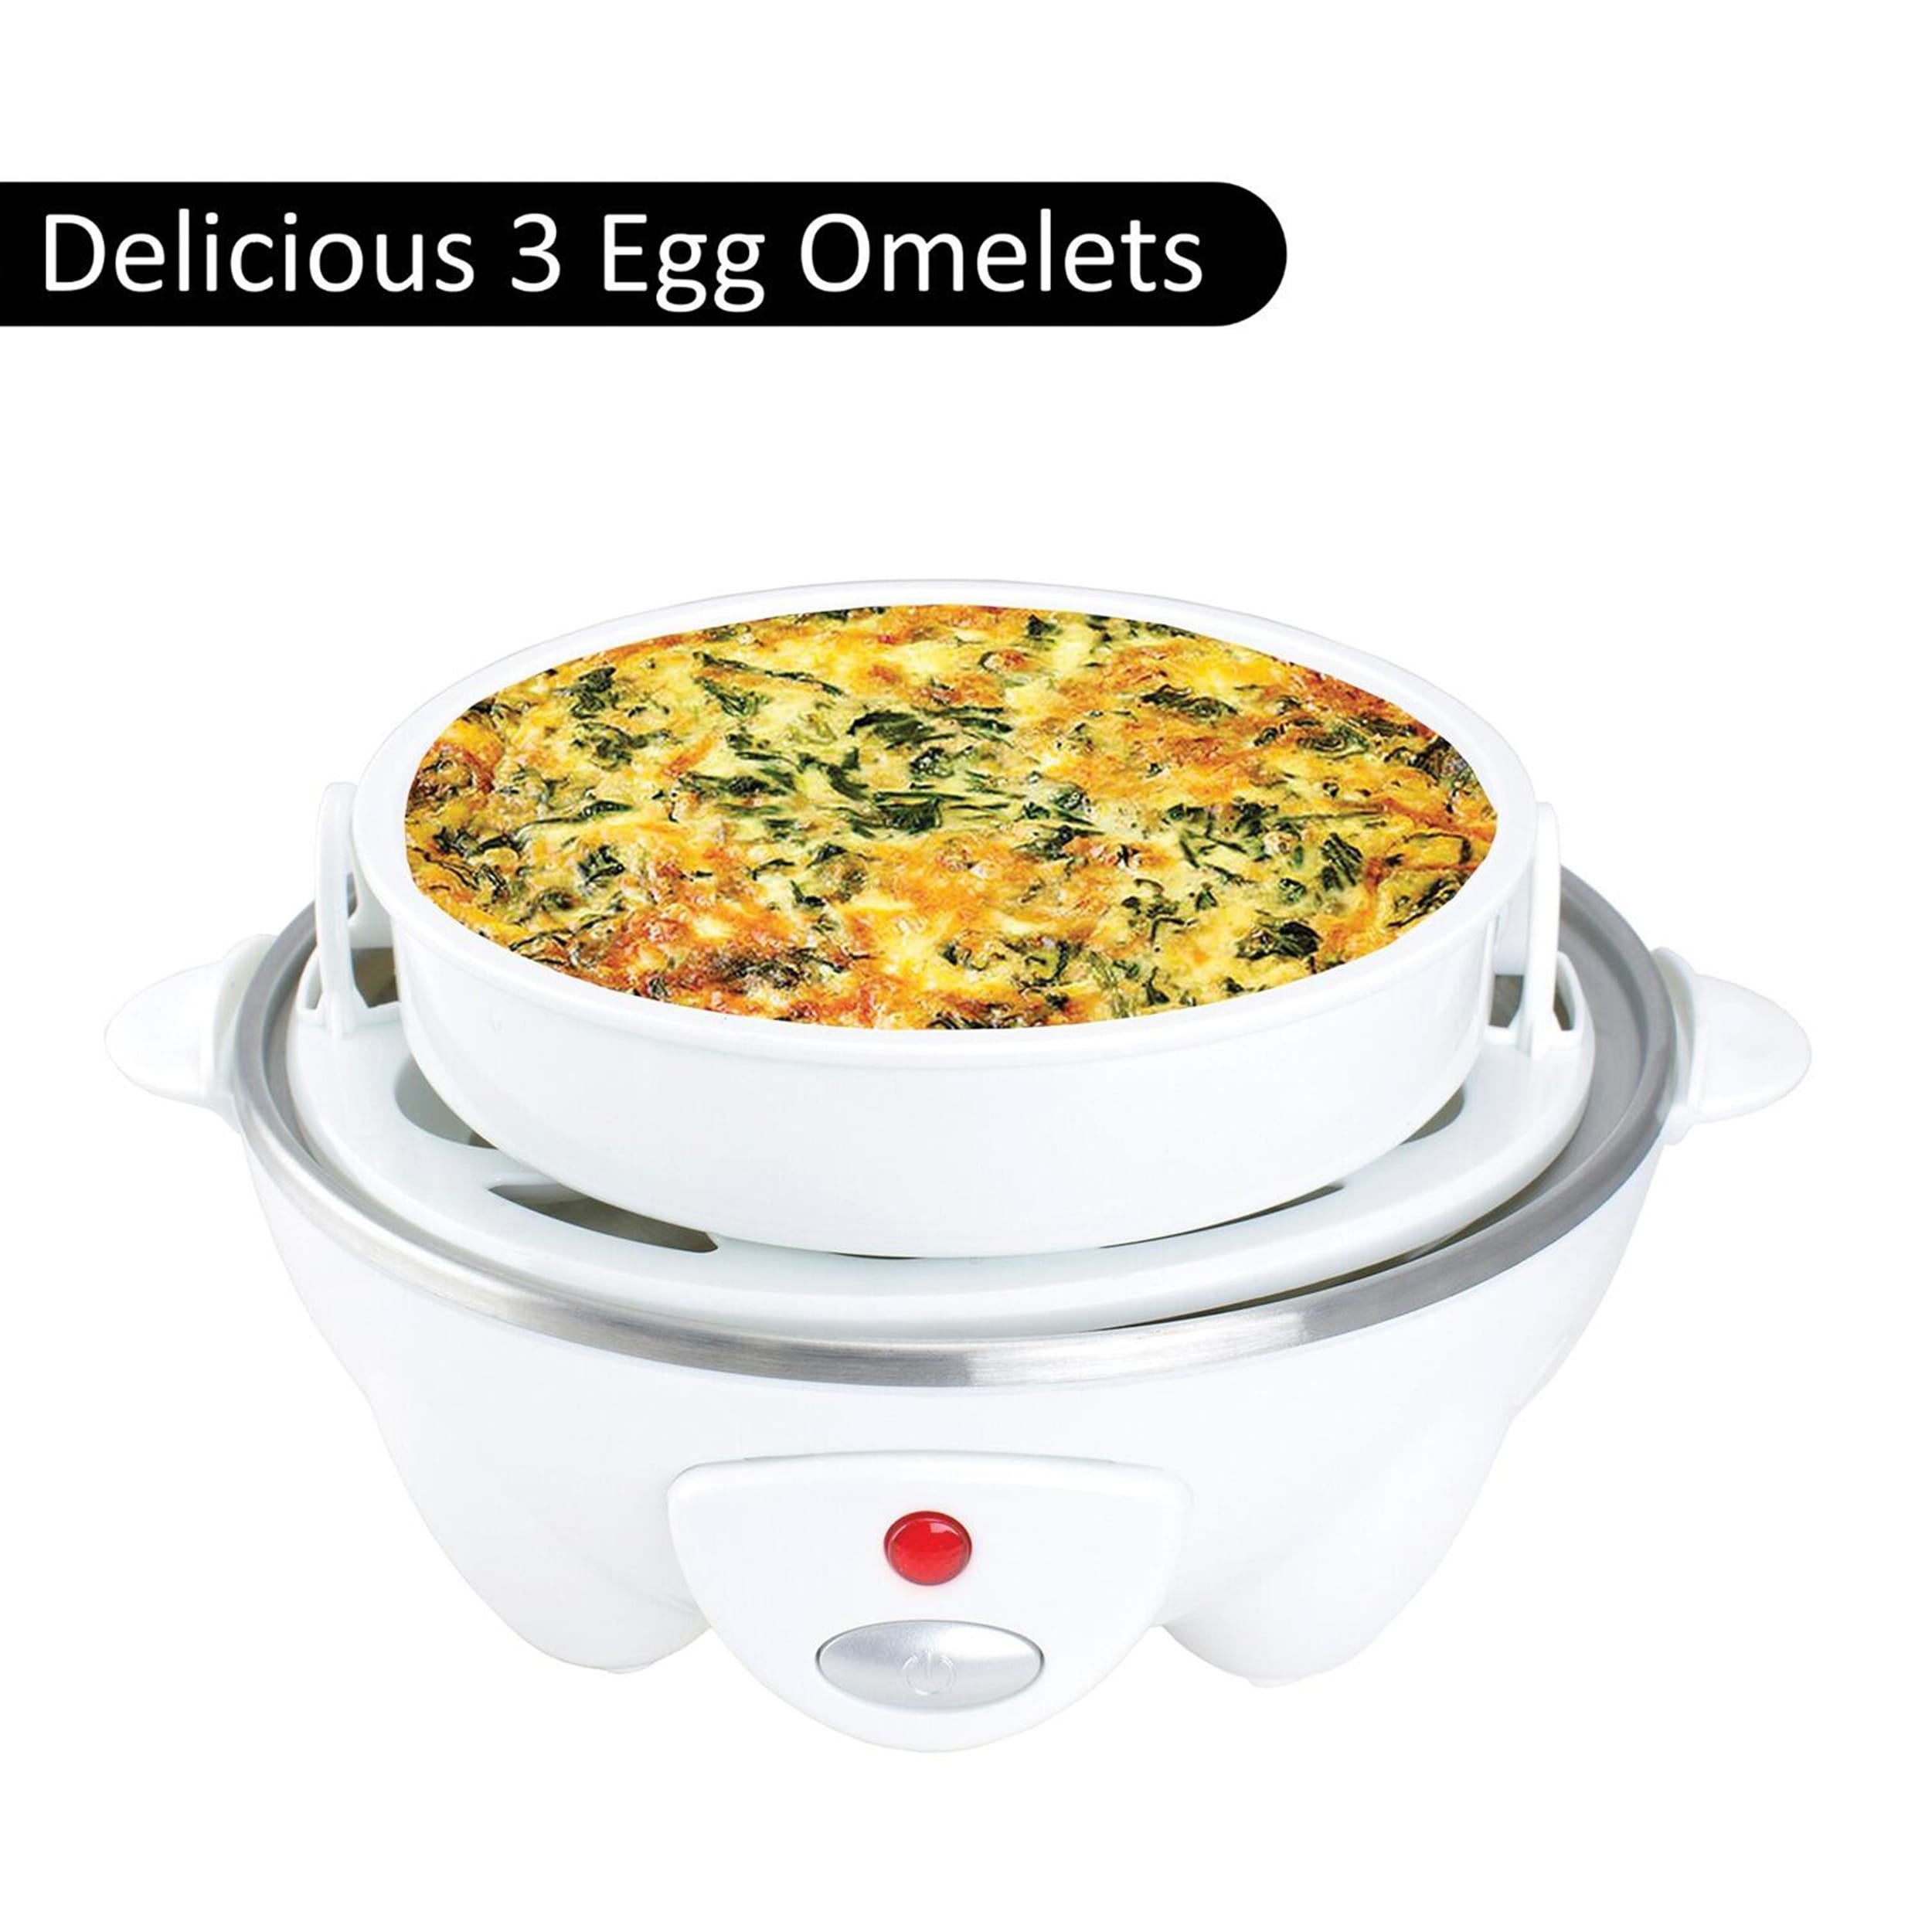 https://ak1.ostkcdn.com/images/products/is/images/direct/1541bd421e52dc58ba4ce136097985dfa0d5023a/7-Egg-Cooker-with-Auto-Off-in-Egg-Shell.jpg